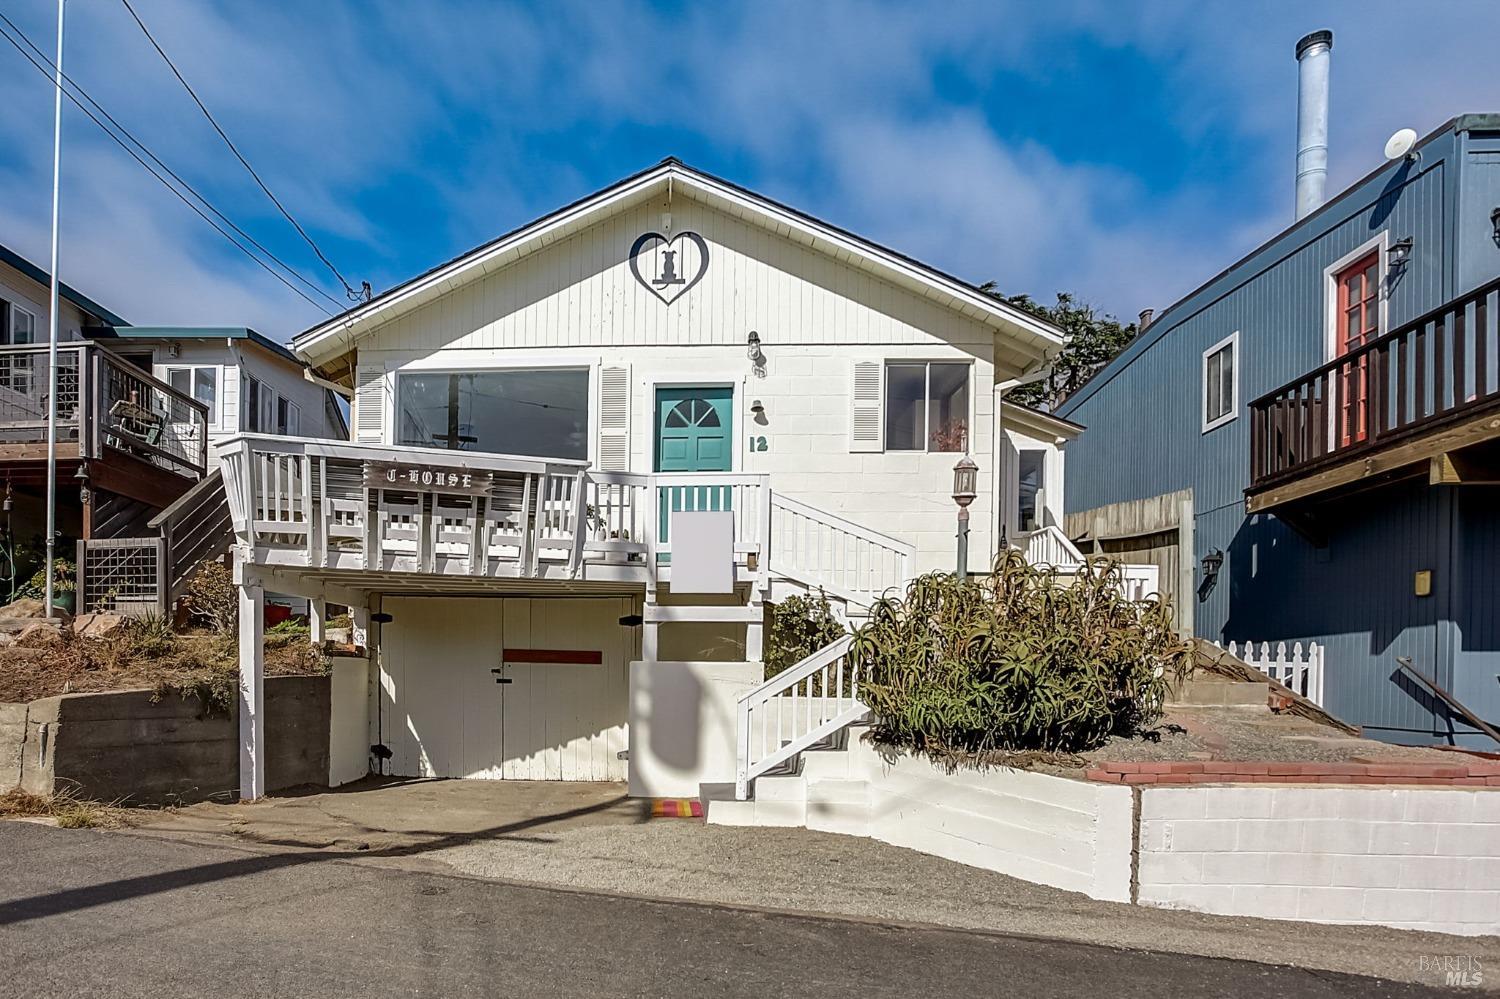 Photo of 12 Ocean View Ave in Dillon Beach, CA